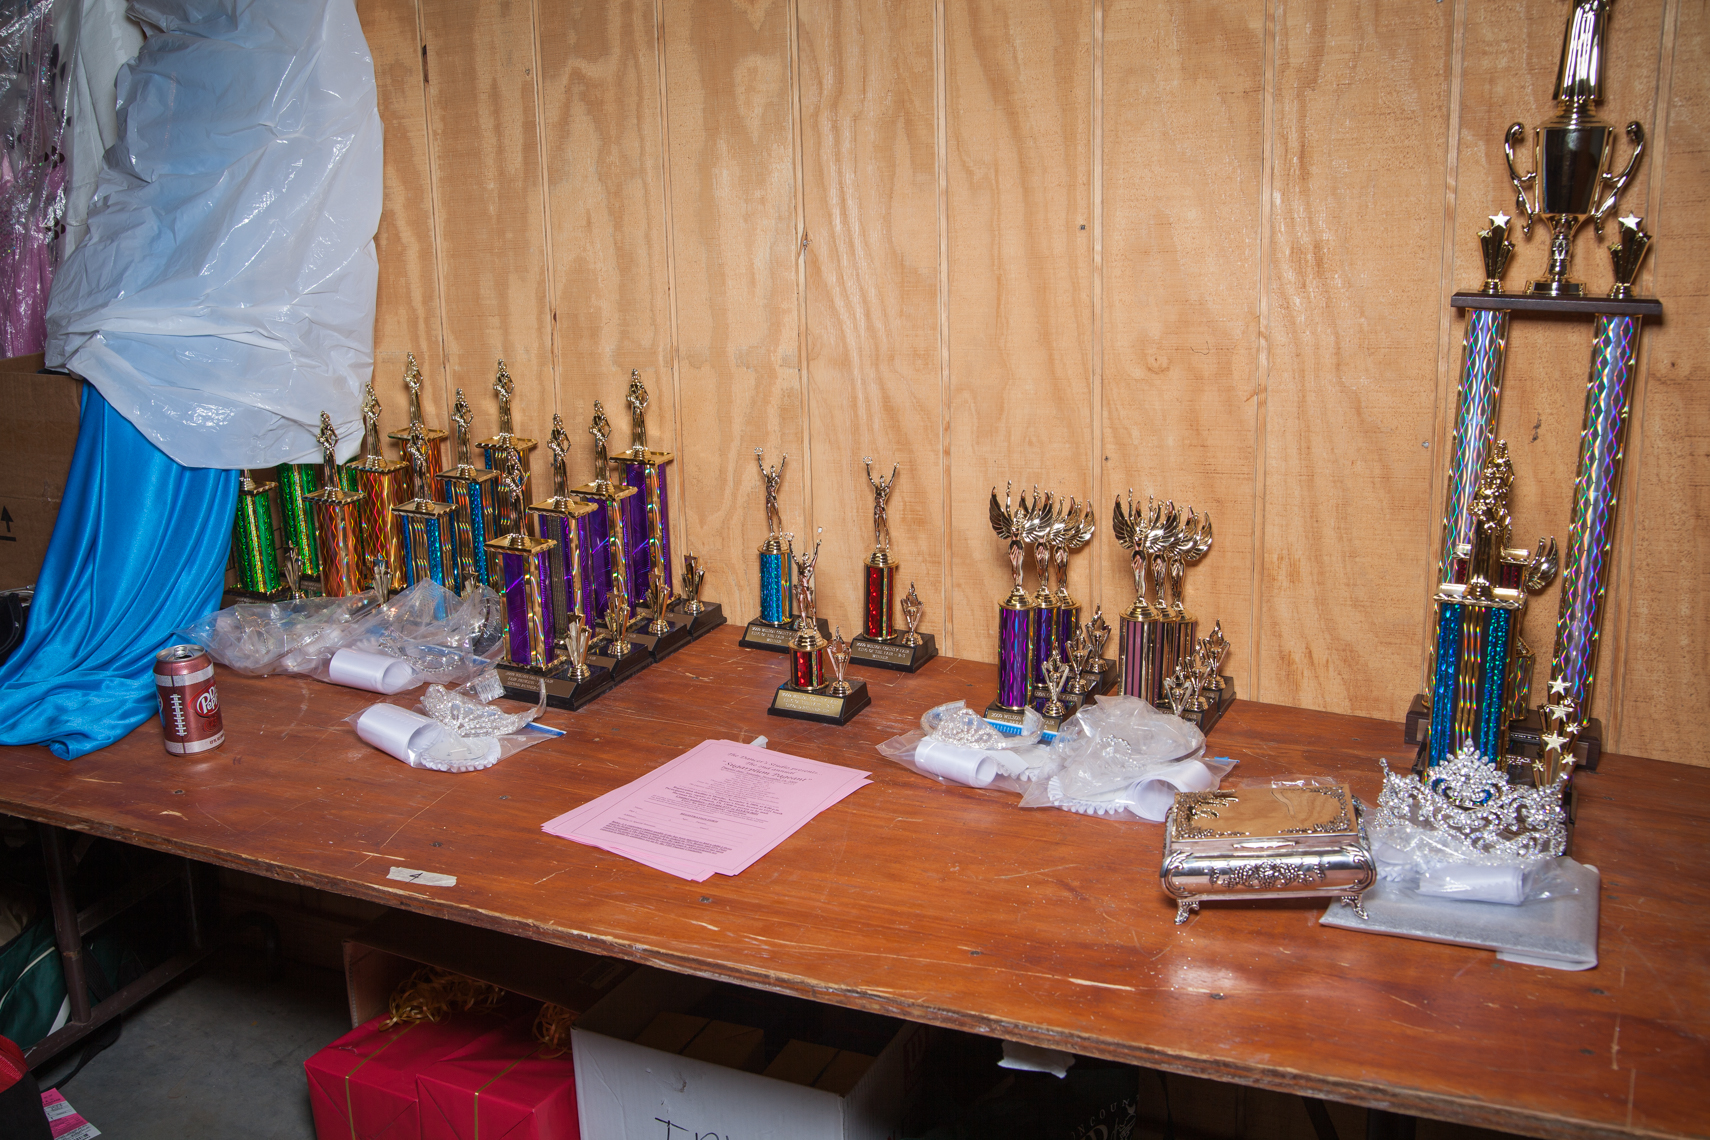 Beauty patent and talent show contest trophies, Wilson County Fair, Lebanon, Tennessee. Kristina Krug is an editorial and documentary photographer